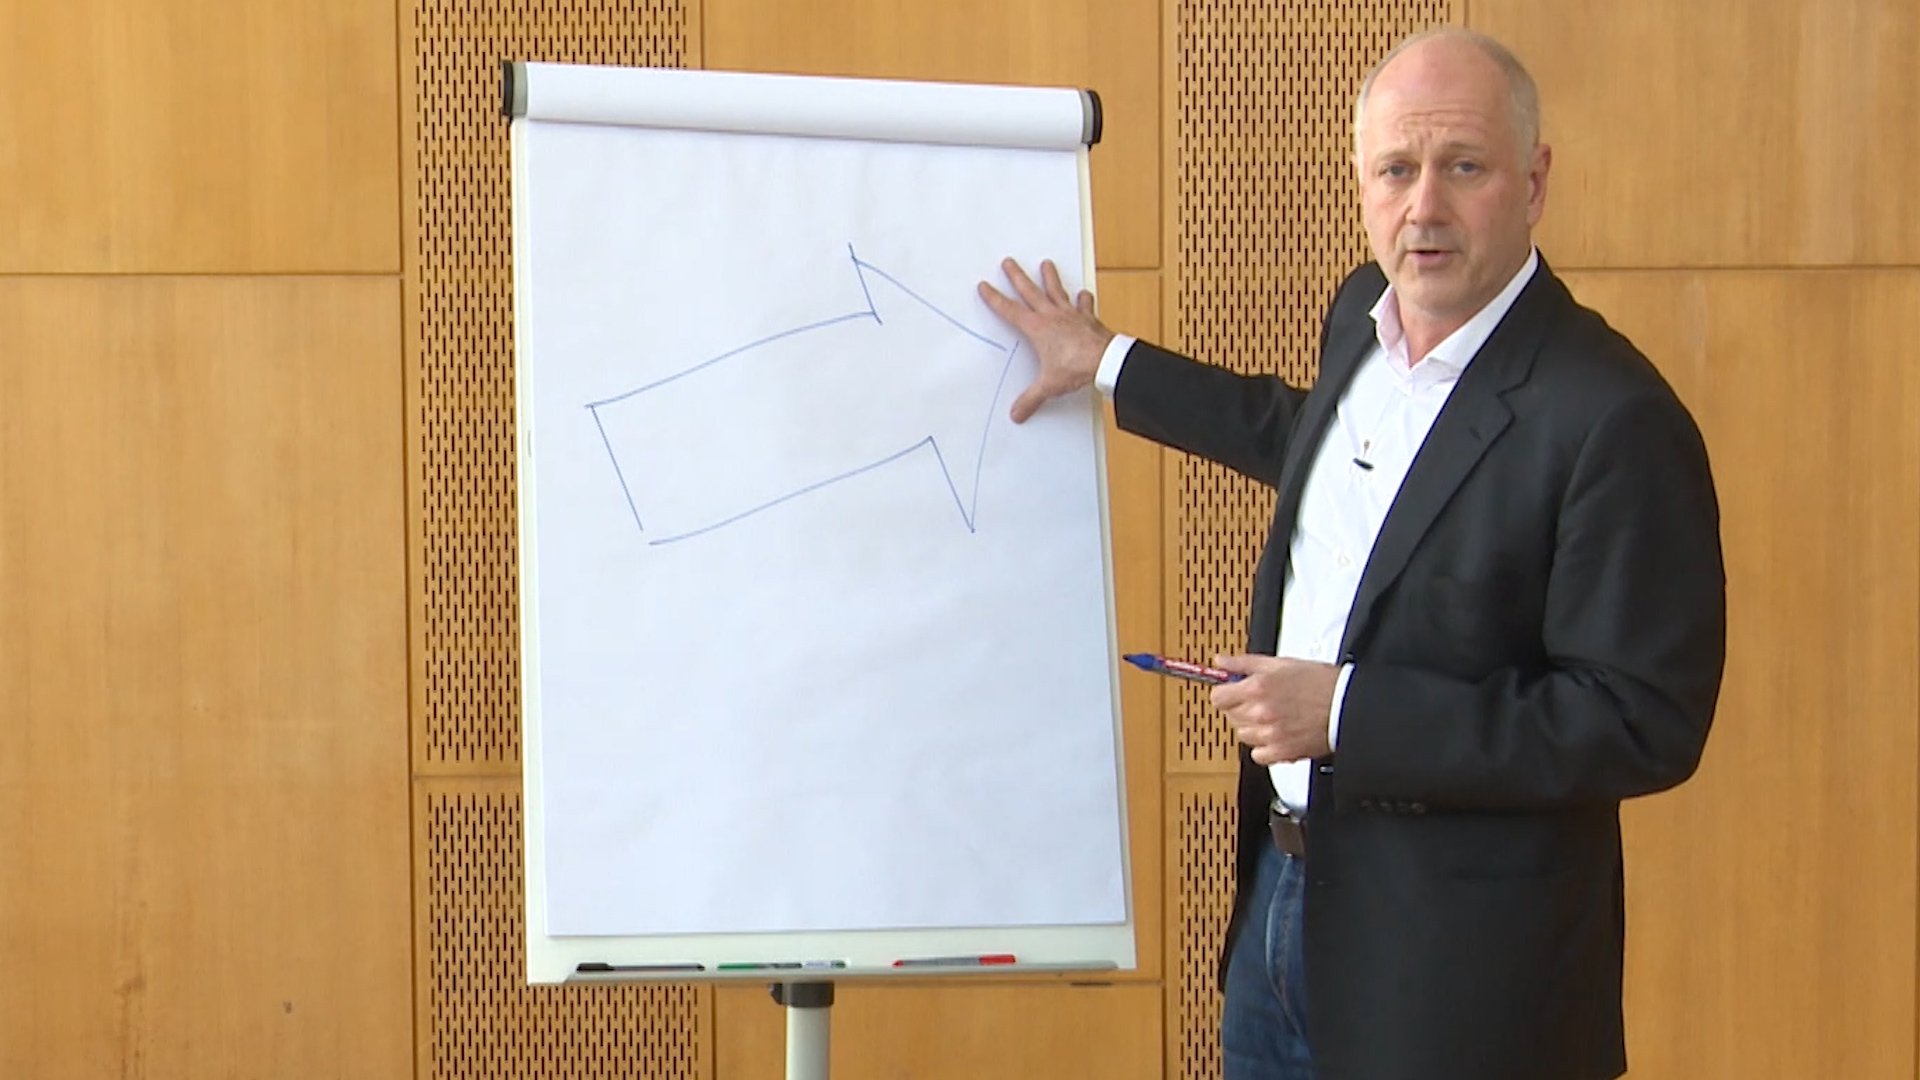 Thumbnail Harald Hungenberg in front of a flipchart